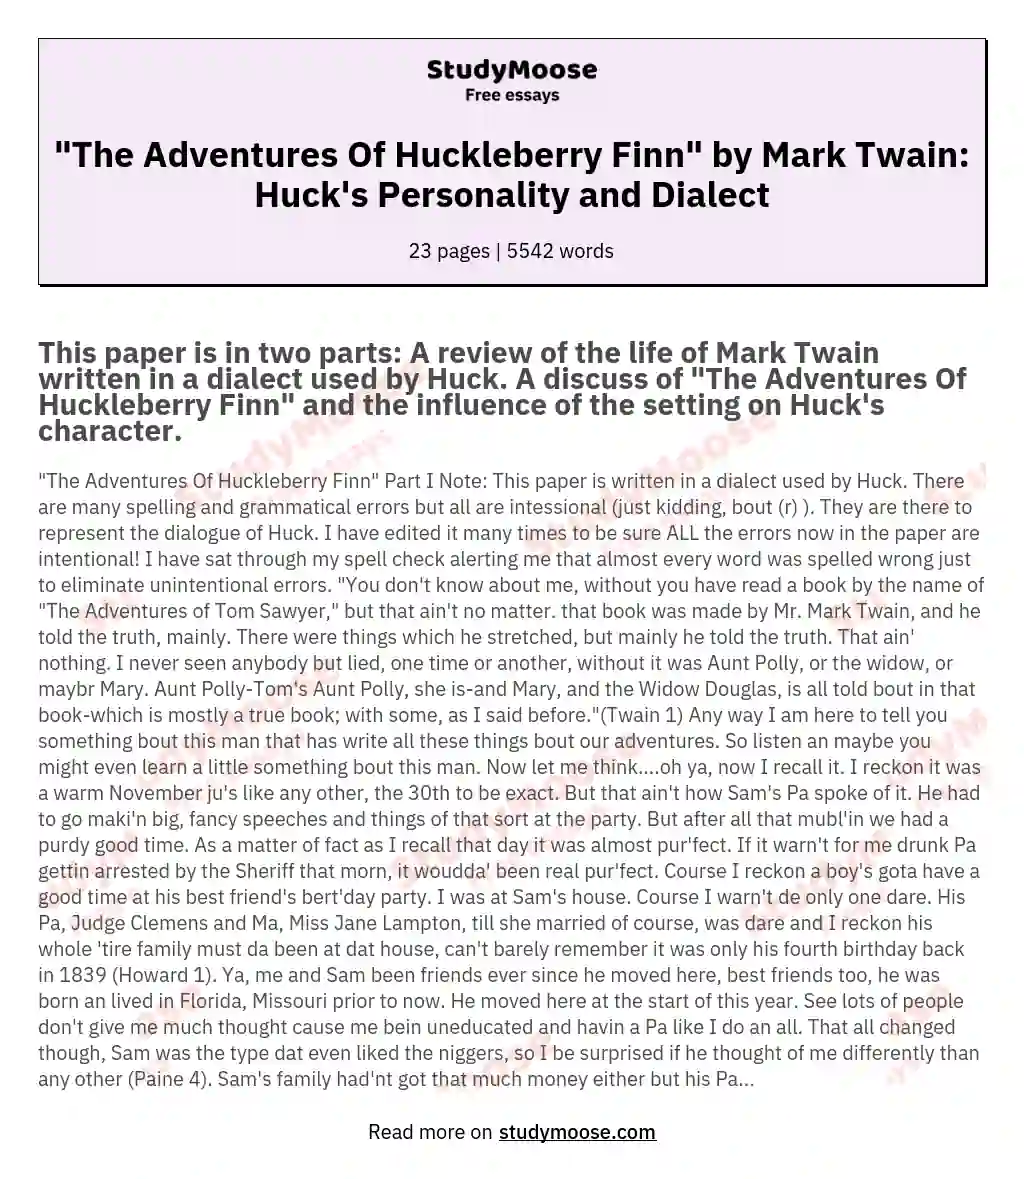 "The Adventures Of Huckleberry Finn" by Mark Twain: Huck's Personality and Dialect